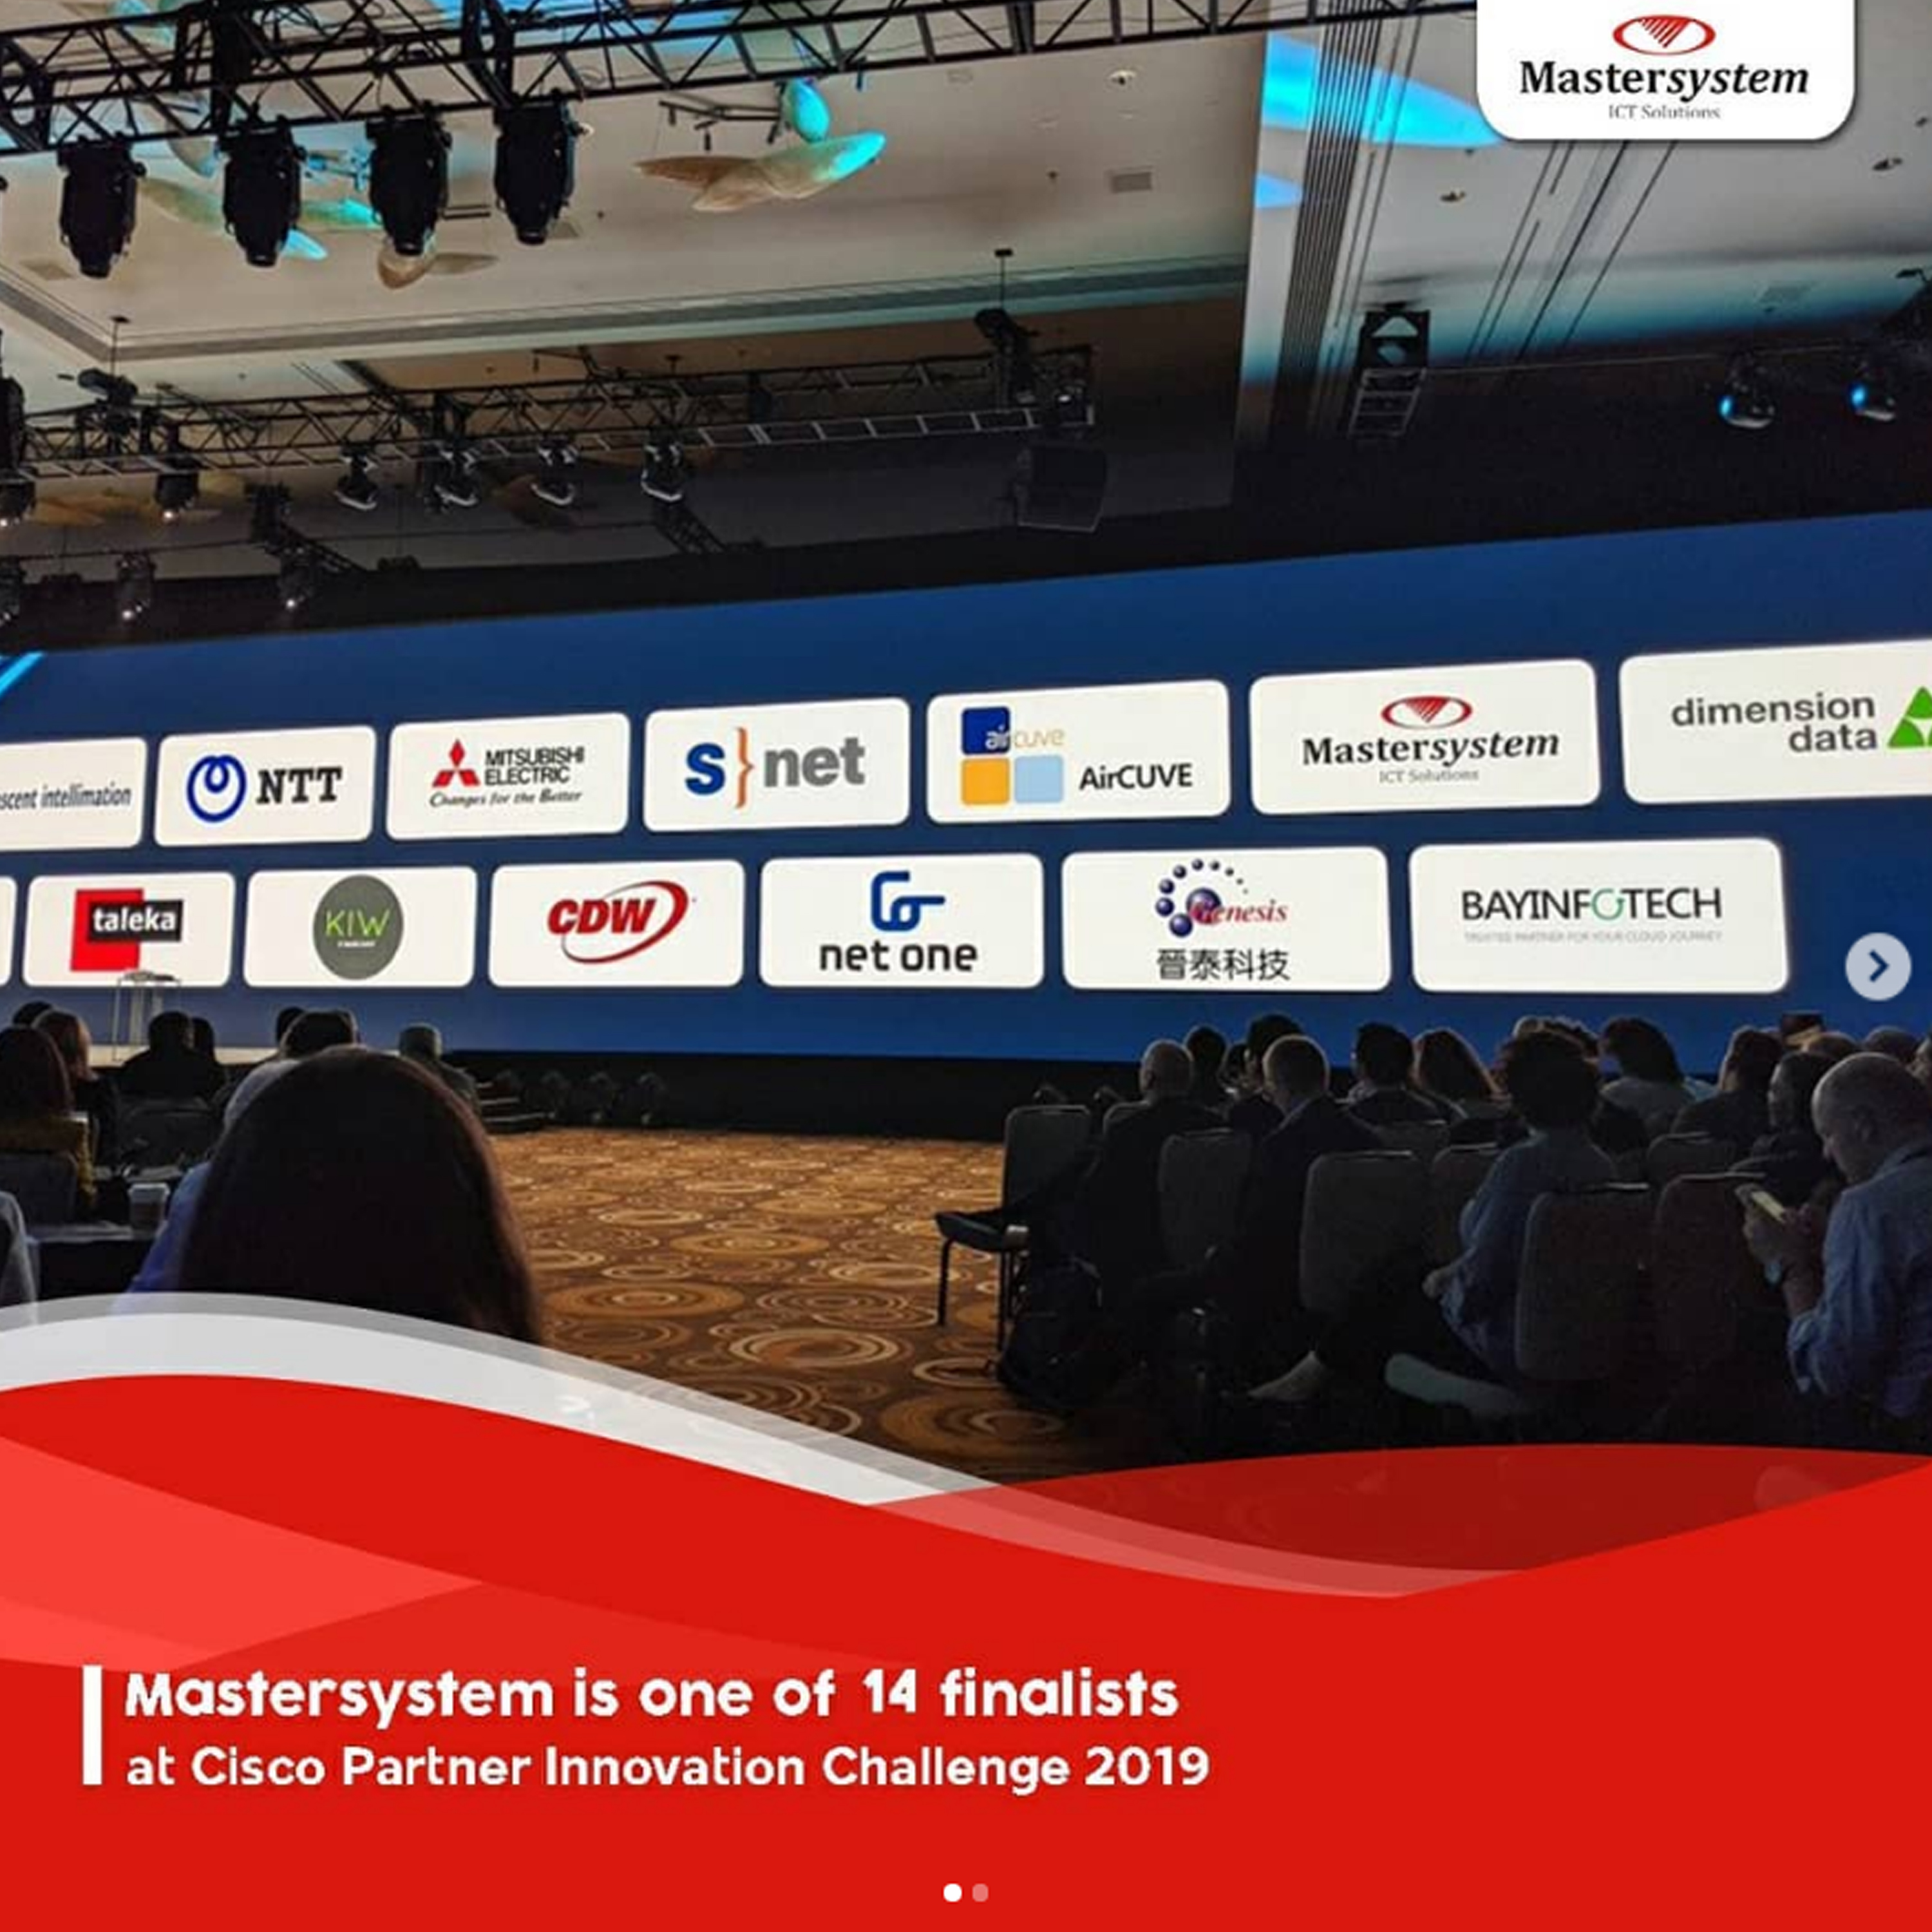 Mastersystem with its MSInsight is recognized as one of 14 finalists at Cisco Partner Innovation Challenge 2019